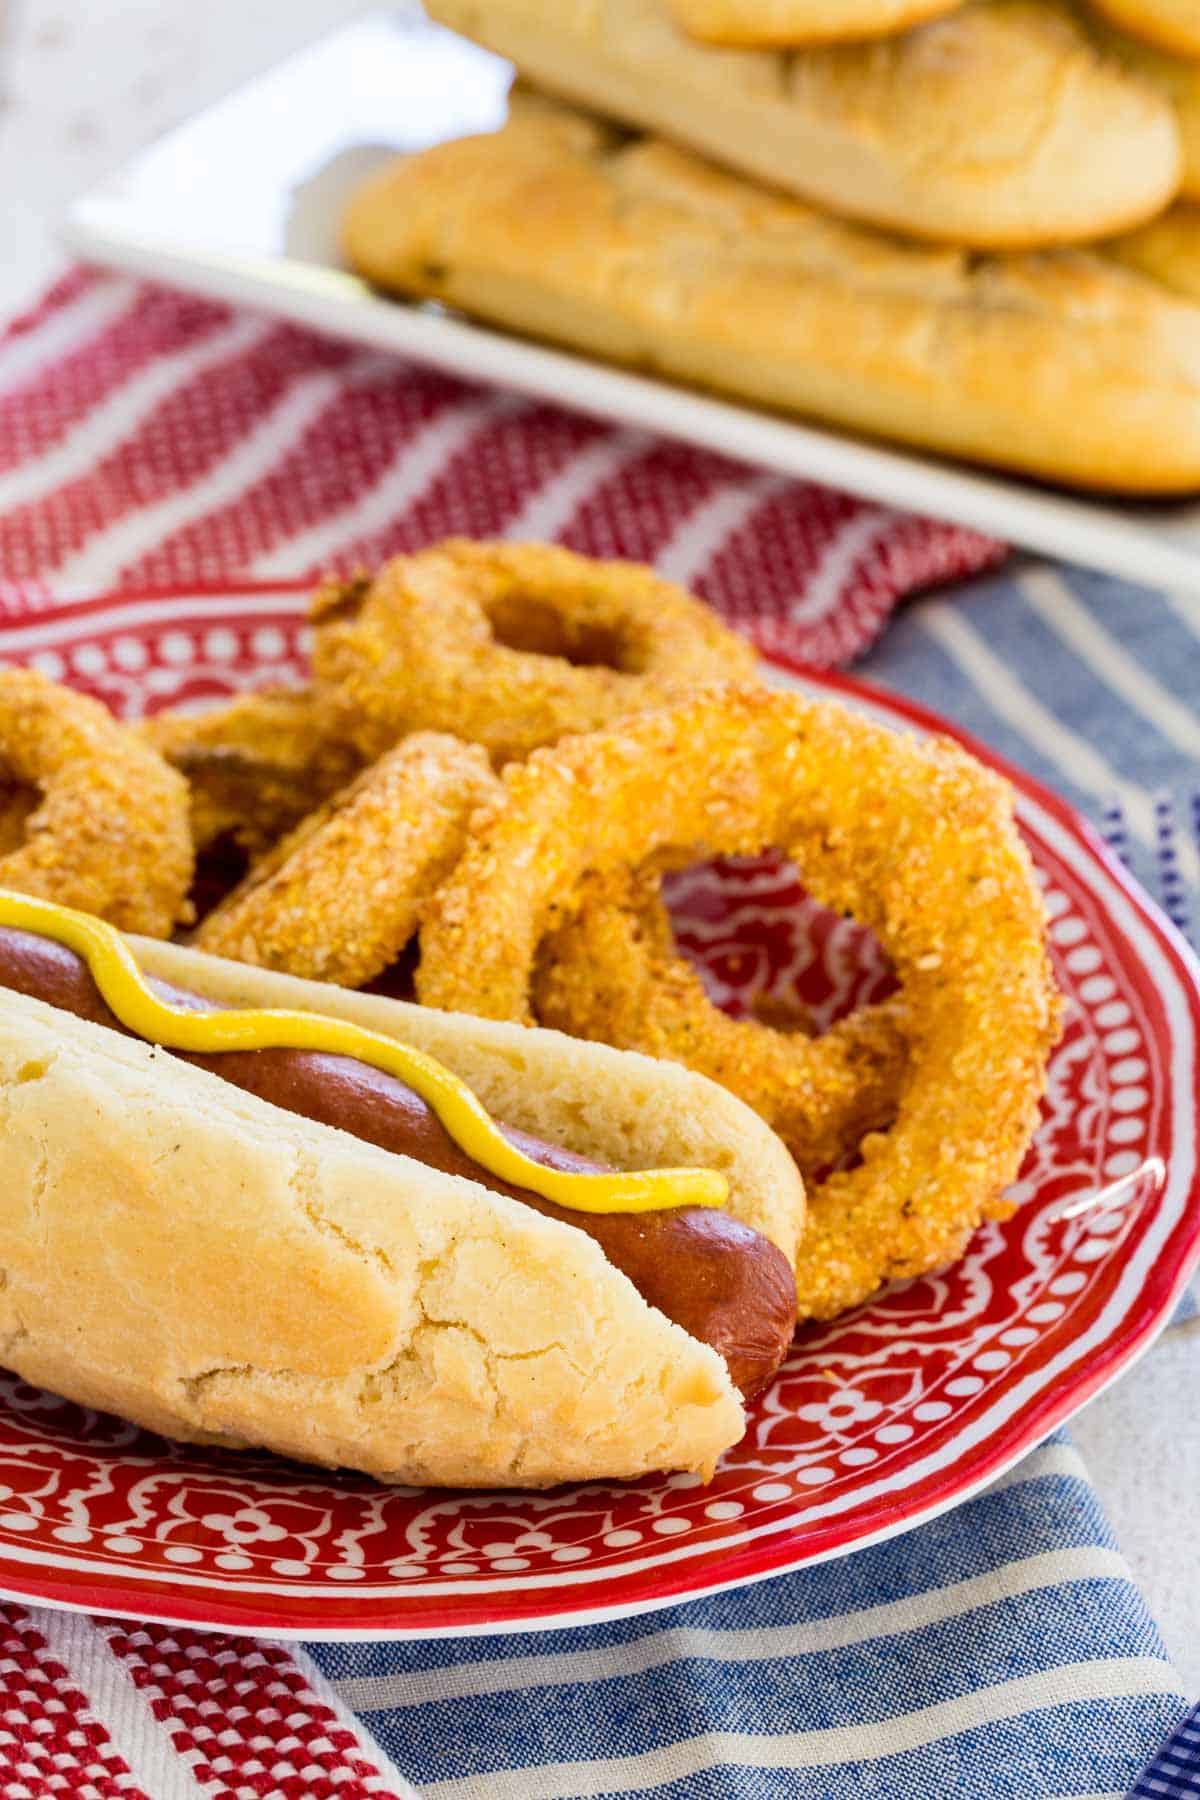 A gluten free hot dog topped with yellow mustard, served on a plate next to onion rings.